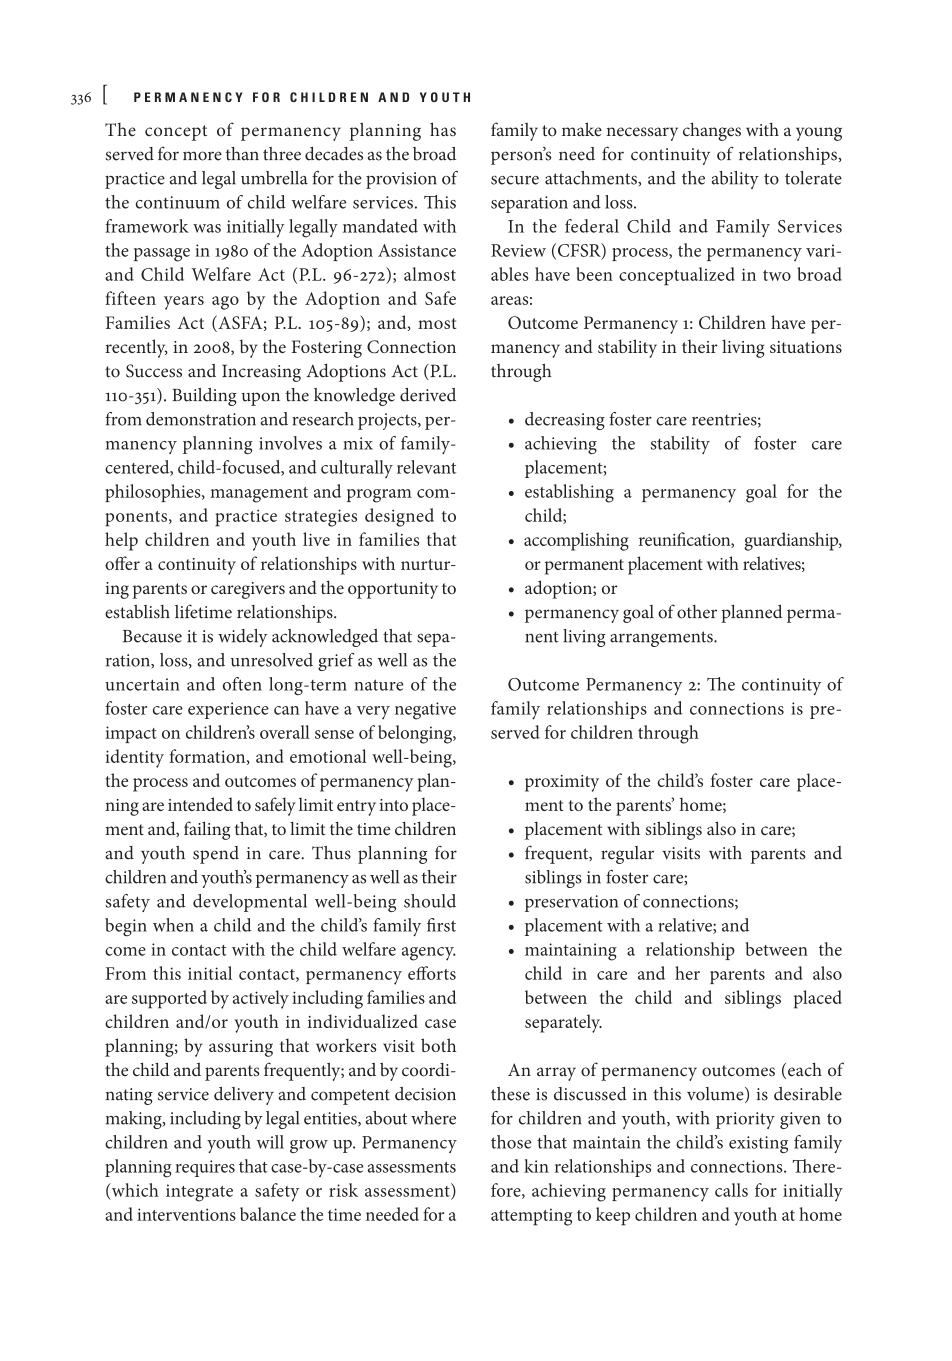 Child Welfare for the Twenty-first Century: A Handbook of Practices, Policies, and Programs, second edition page 336